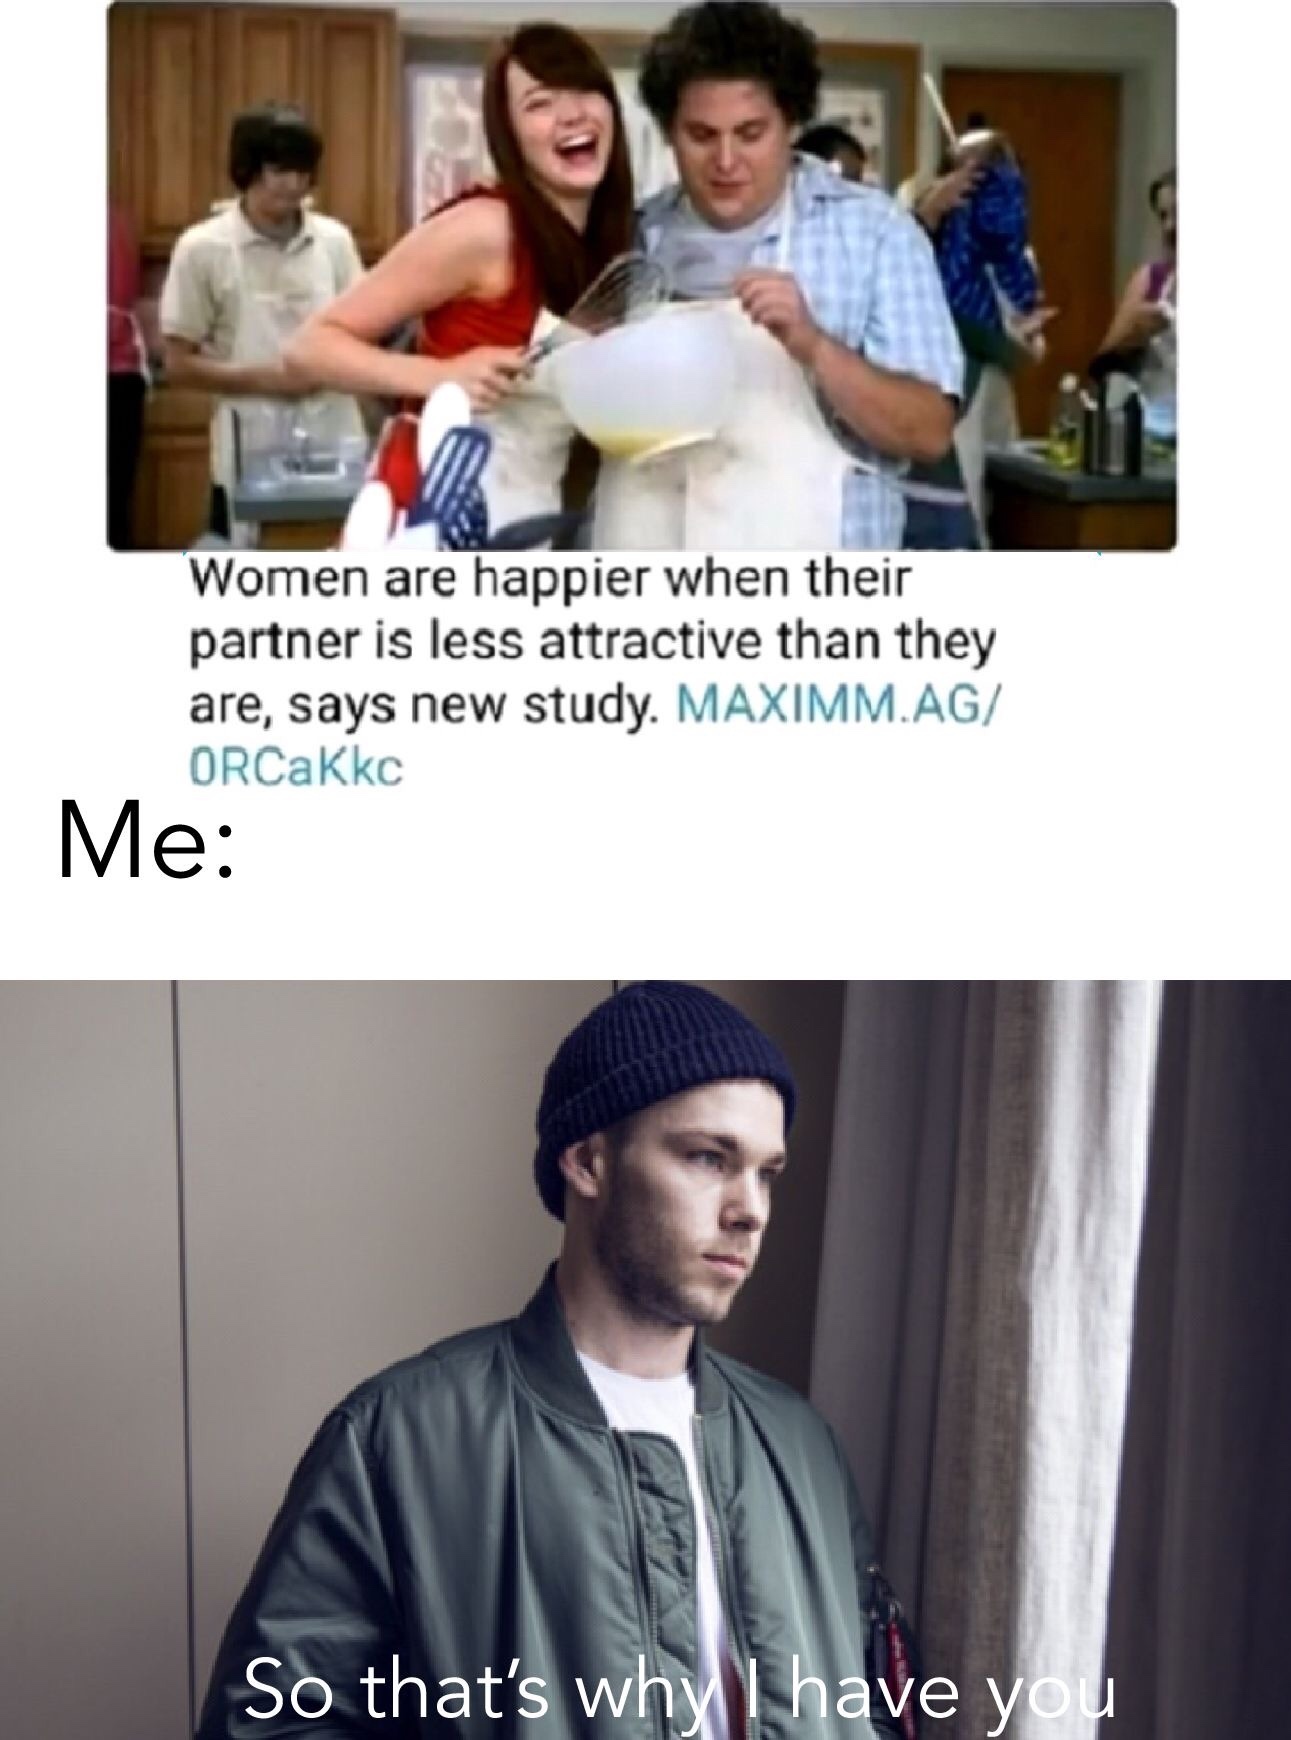 So that’s why I have a girlfriend - meme